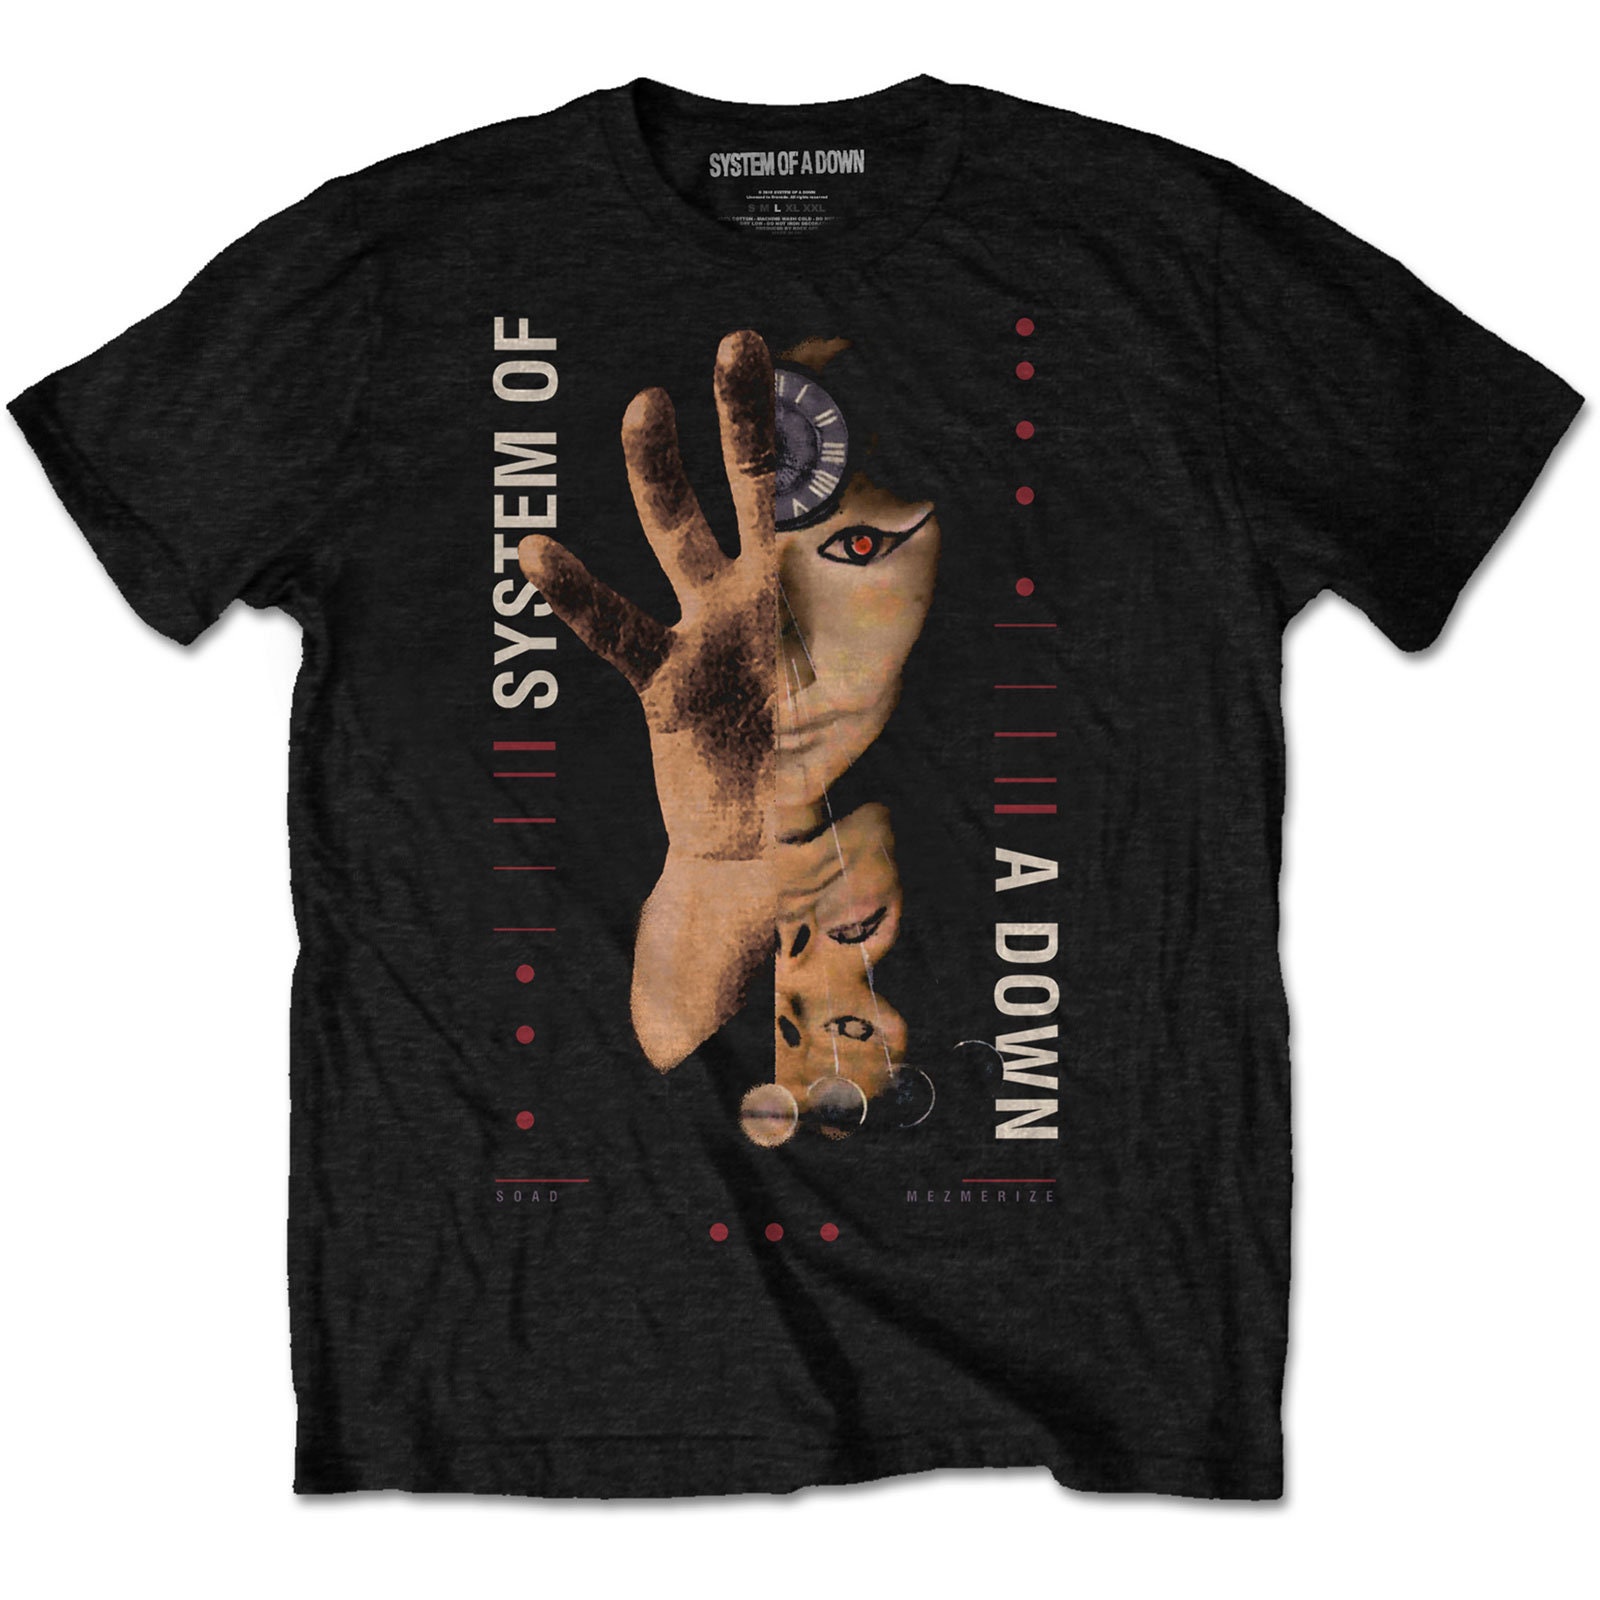 Discover SYSTEM OF DOWN Pharoah Official Tee T-Shirt Mens Unisex